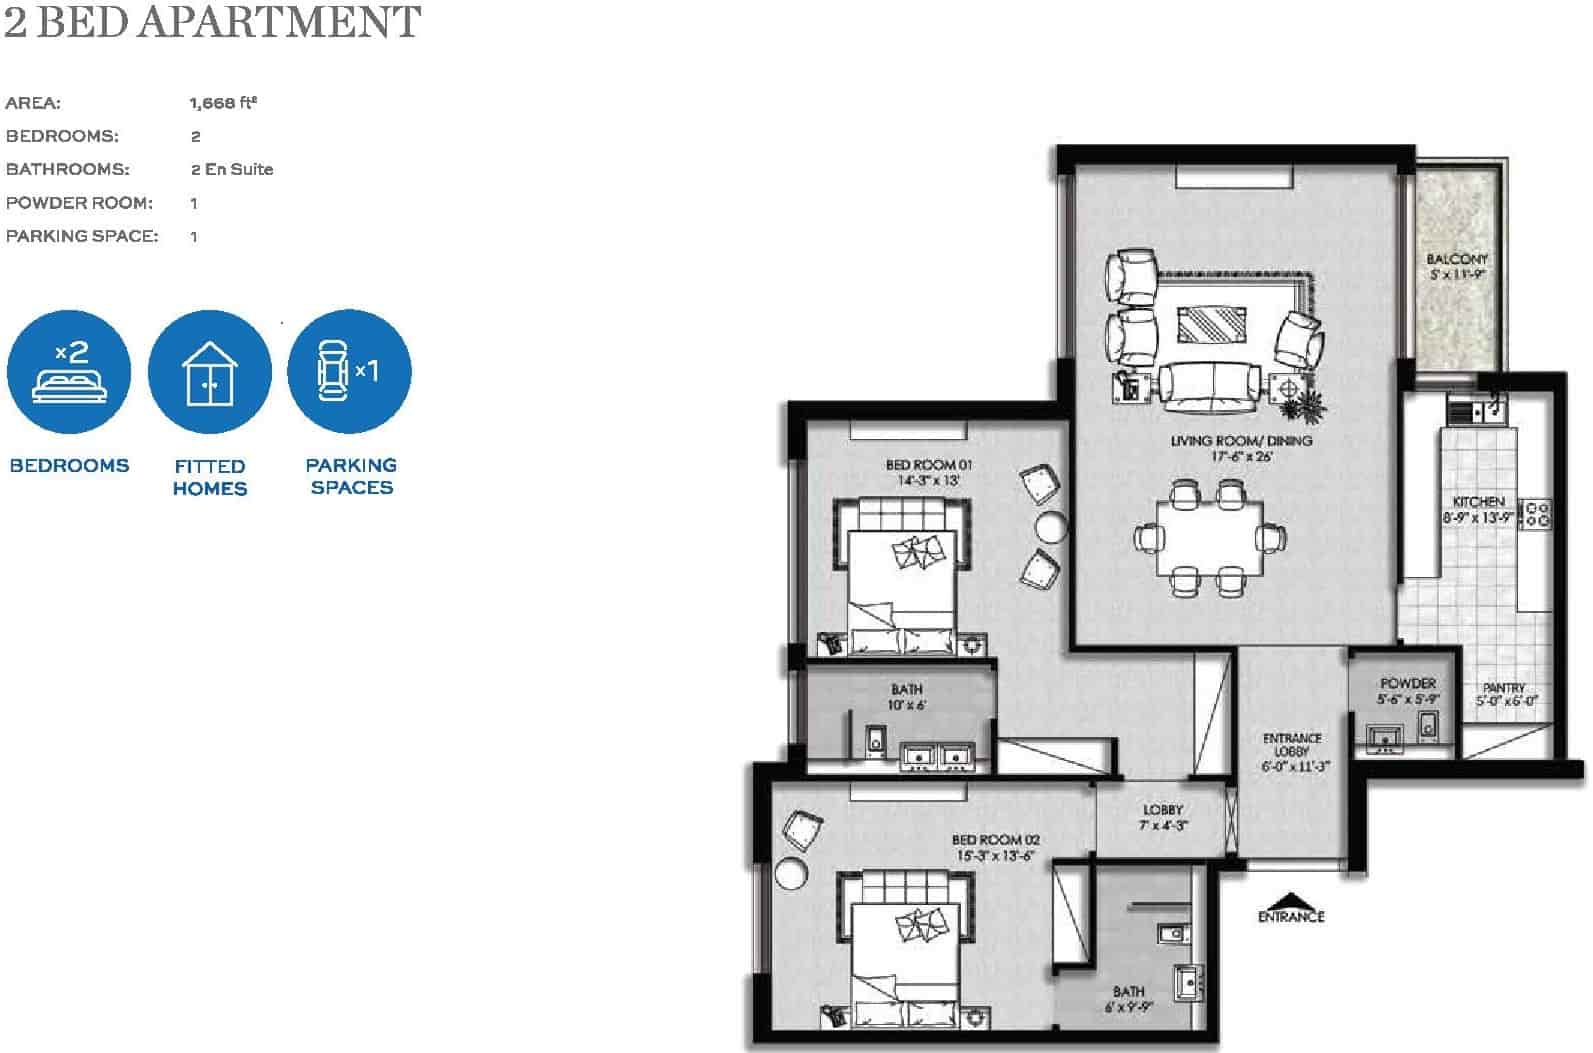 The Heights Eighteen 2 Bed Apartment Layout Plan